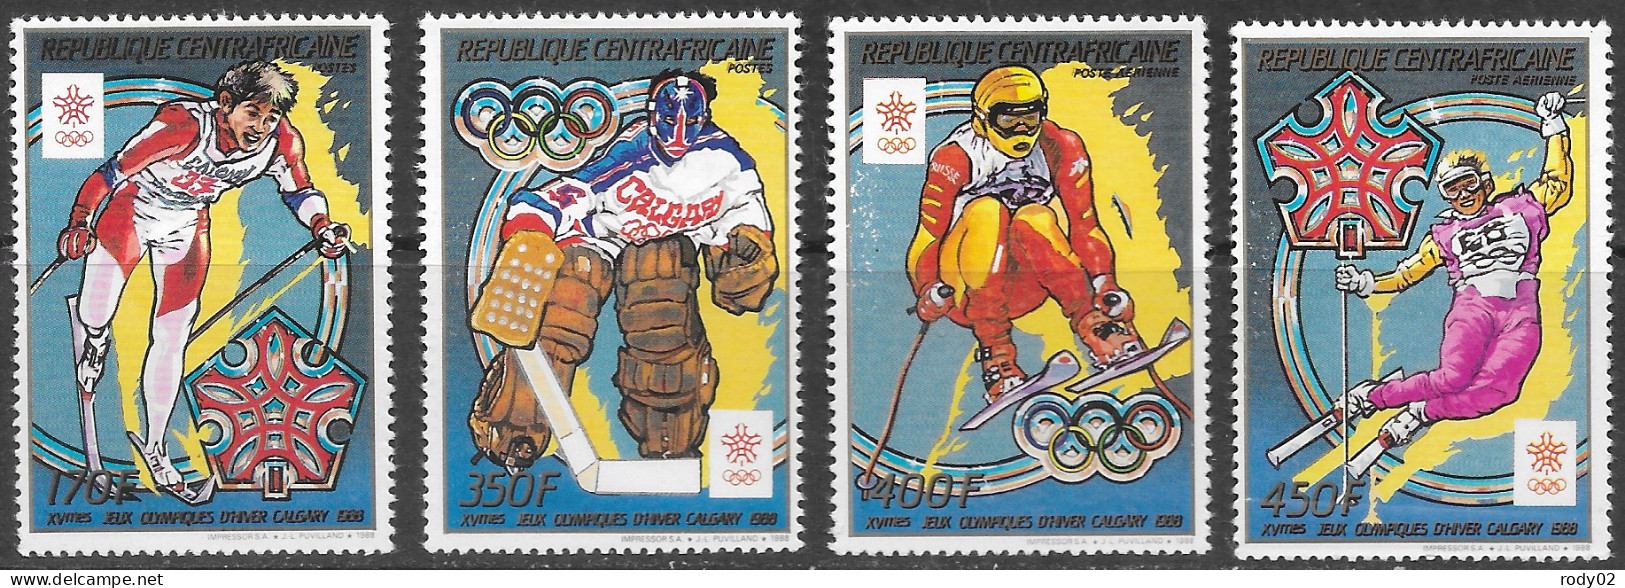 CENTRAFRIQUE - JEUX OLYMPIQUES D'HIVER A CALGARY - N° 795 A 796 ET PA 377 A 378 - NEUF** MNH - Invierno 1988: Calgary